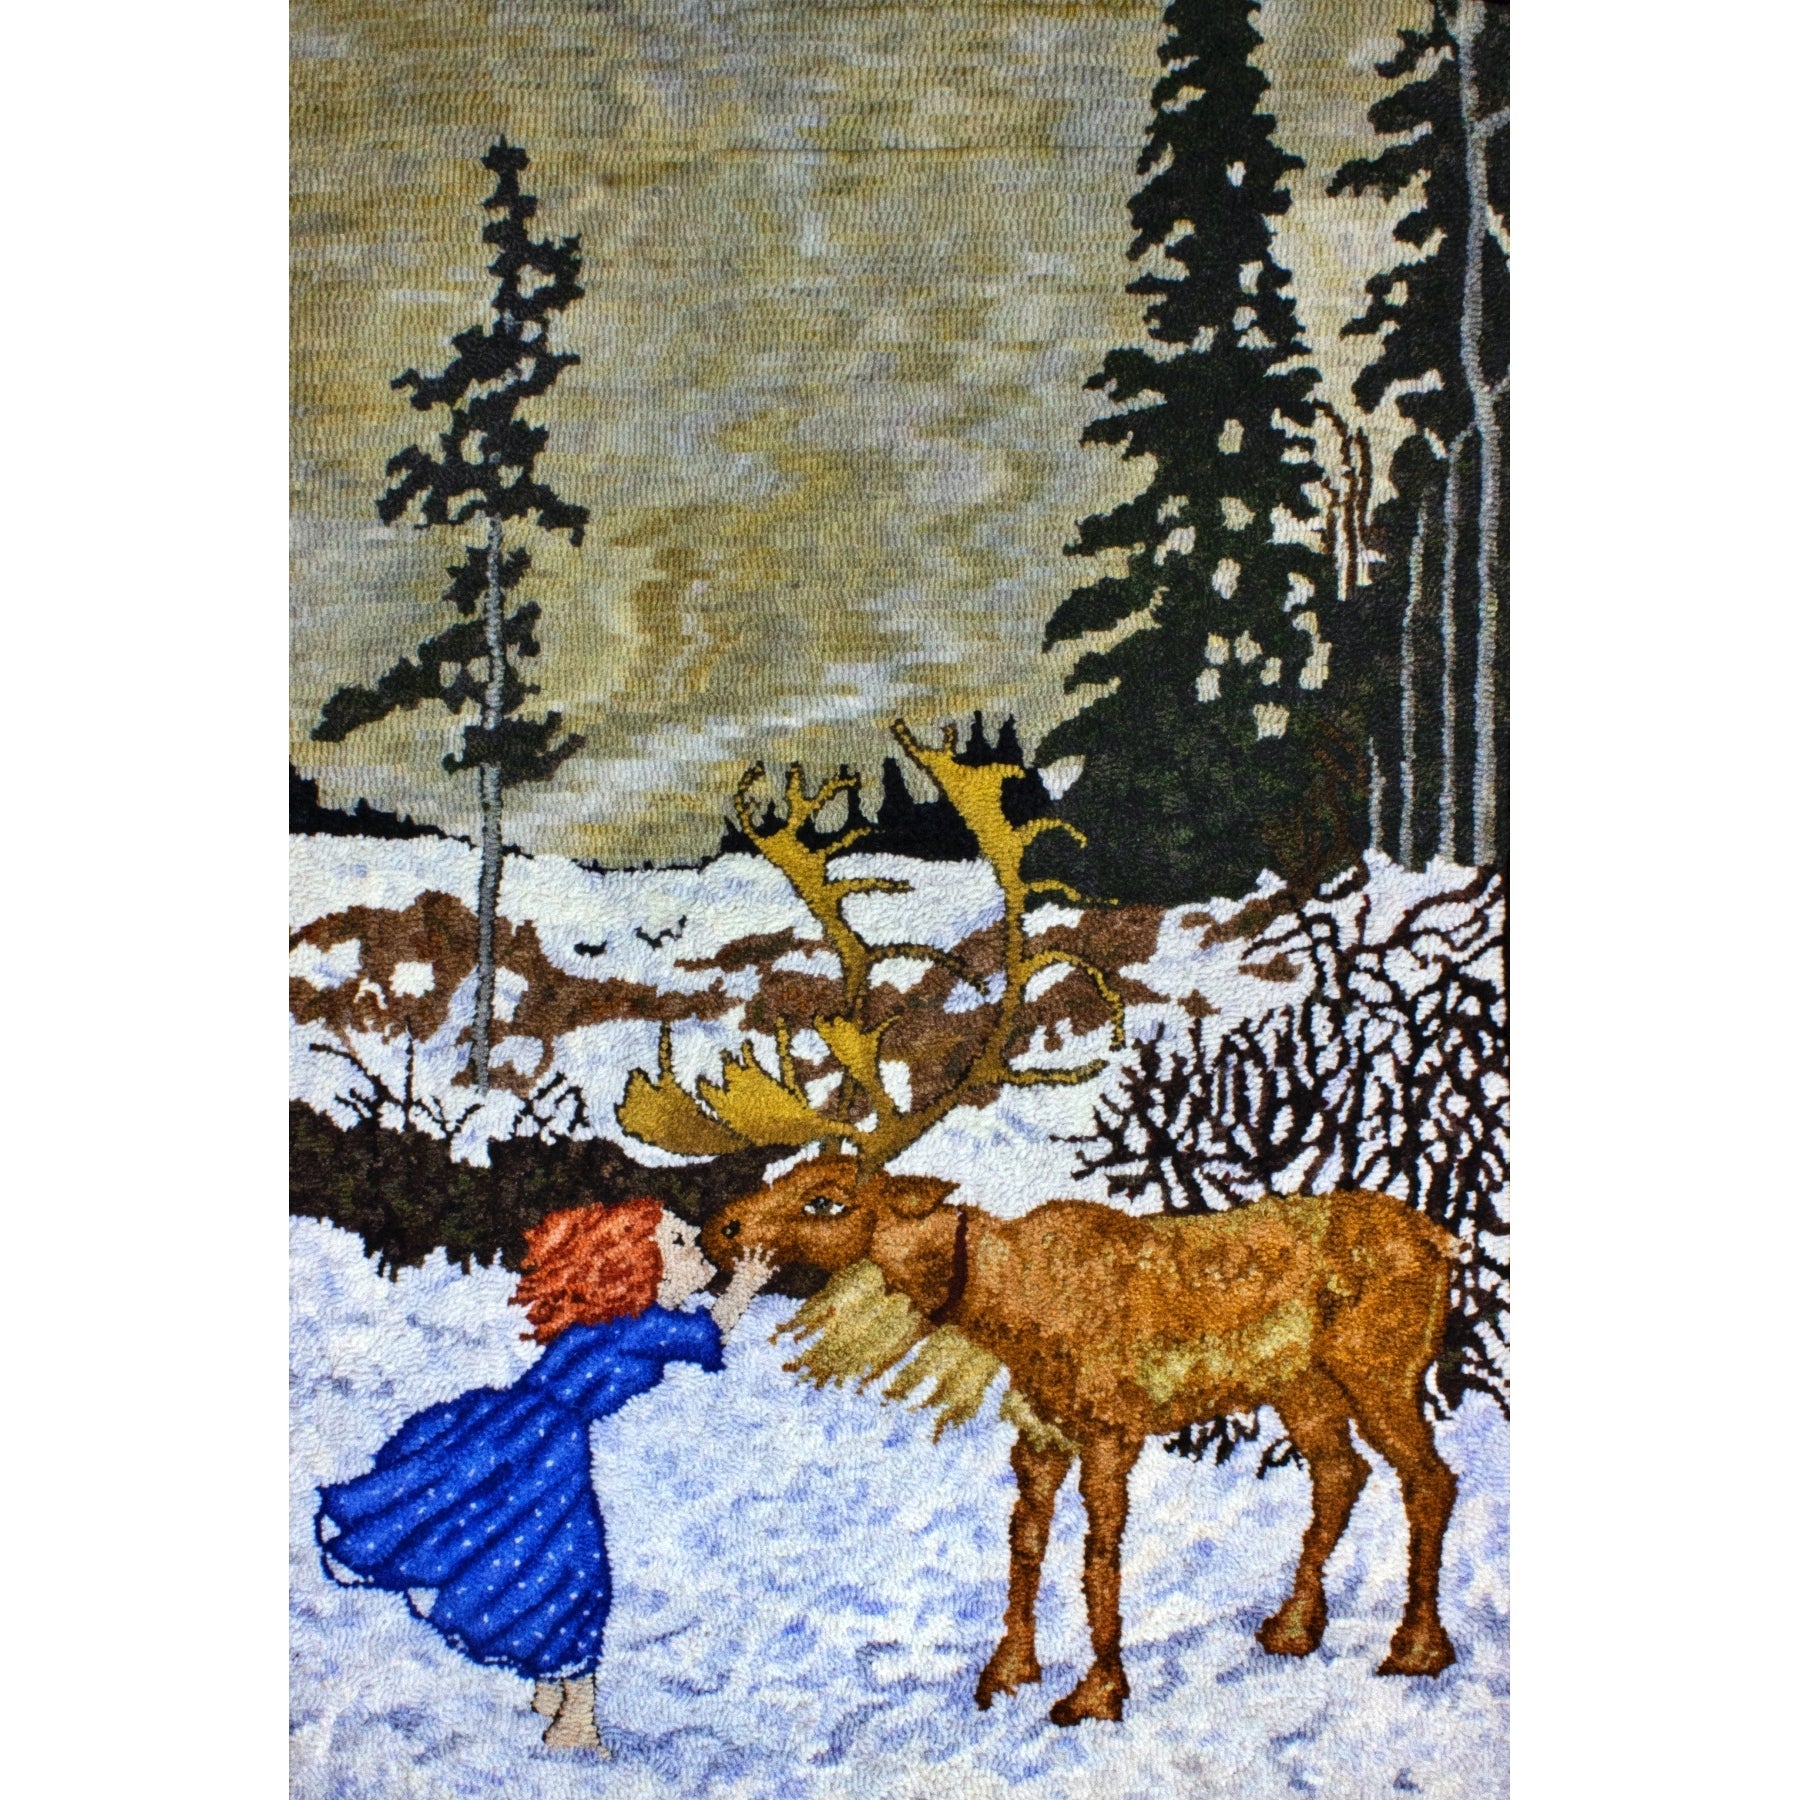 Gerda and the Reindeer, ill. Edmund Dulac, 1911, rug hooked by Suzanne White